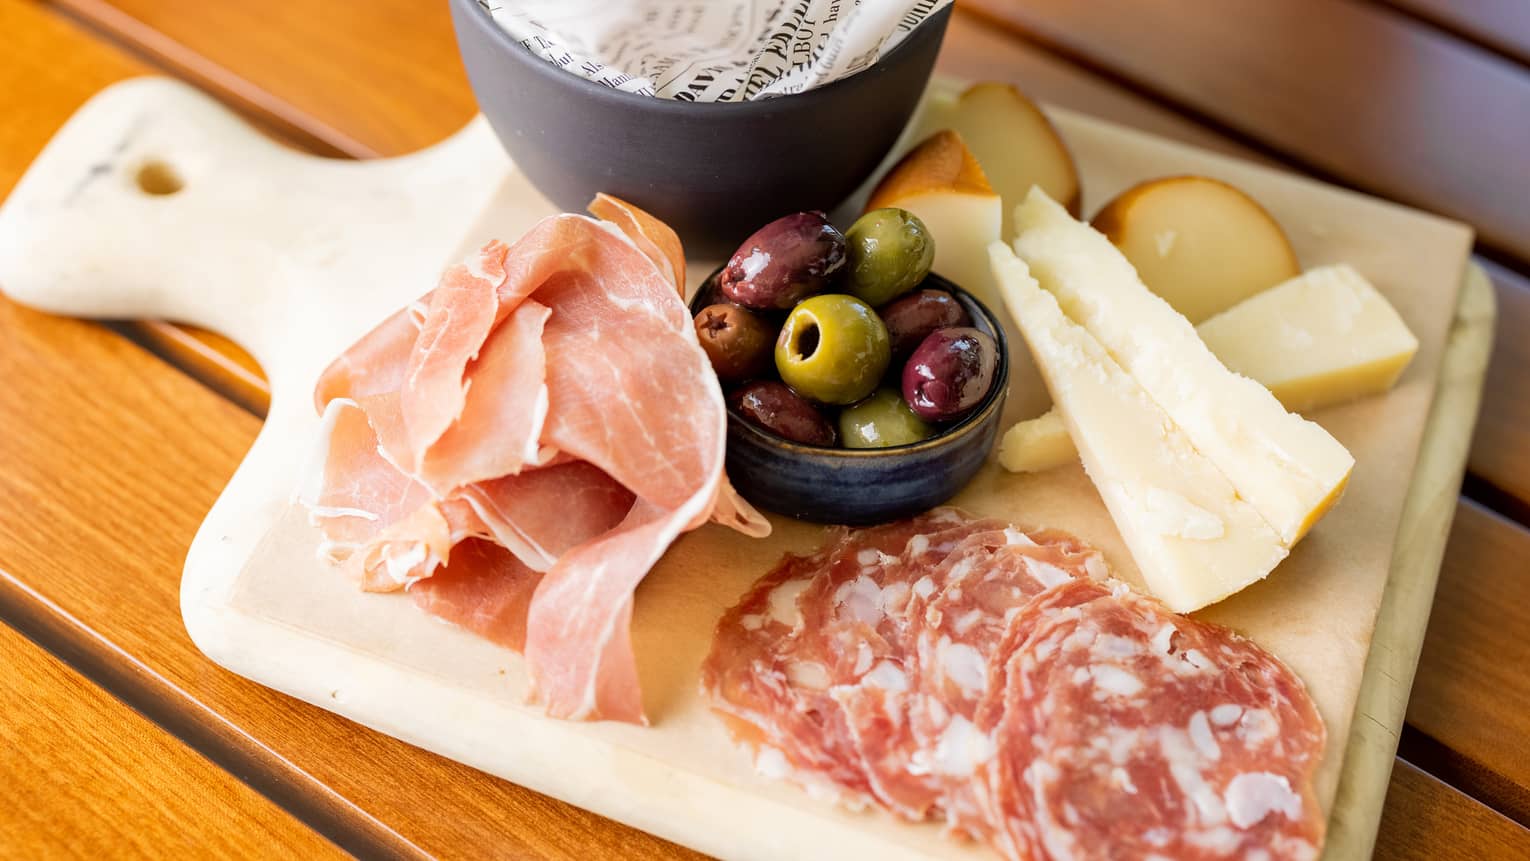 A selection of cheese and charcuterie on a wooden board.